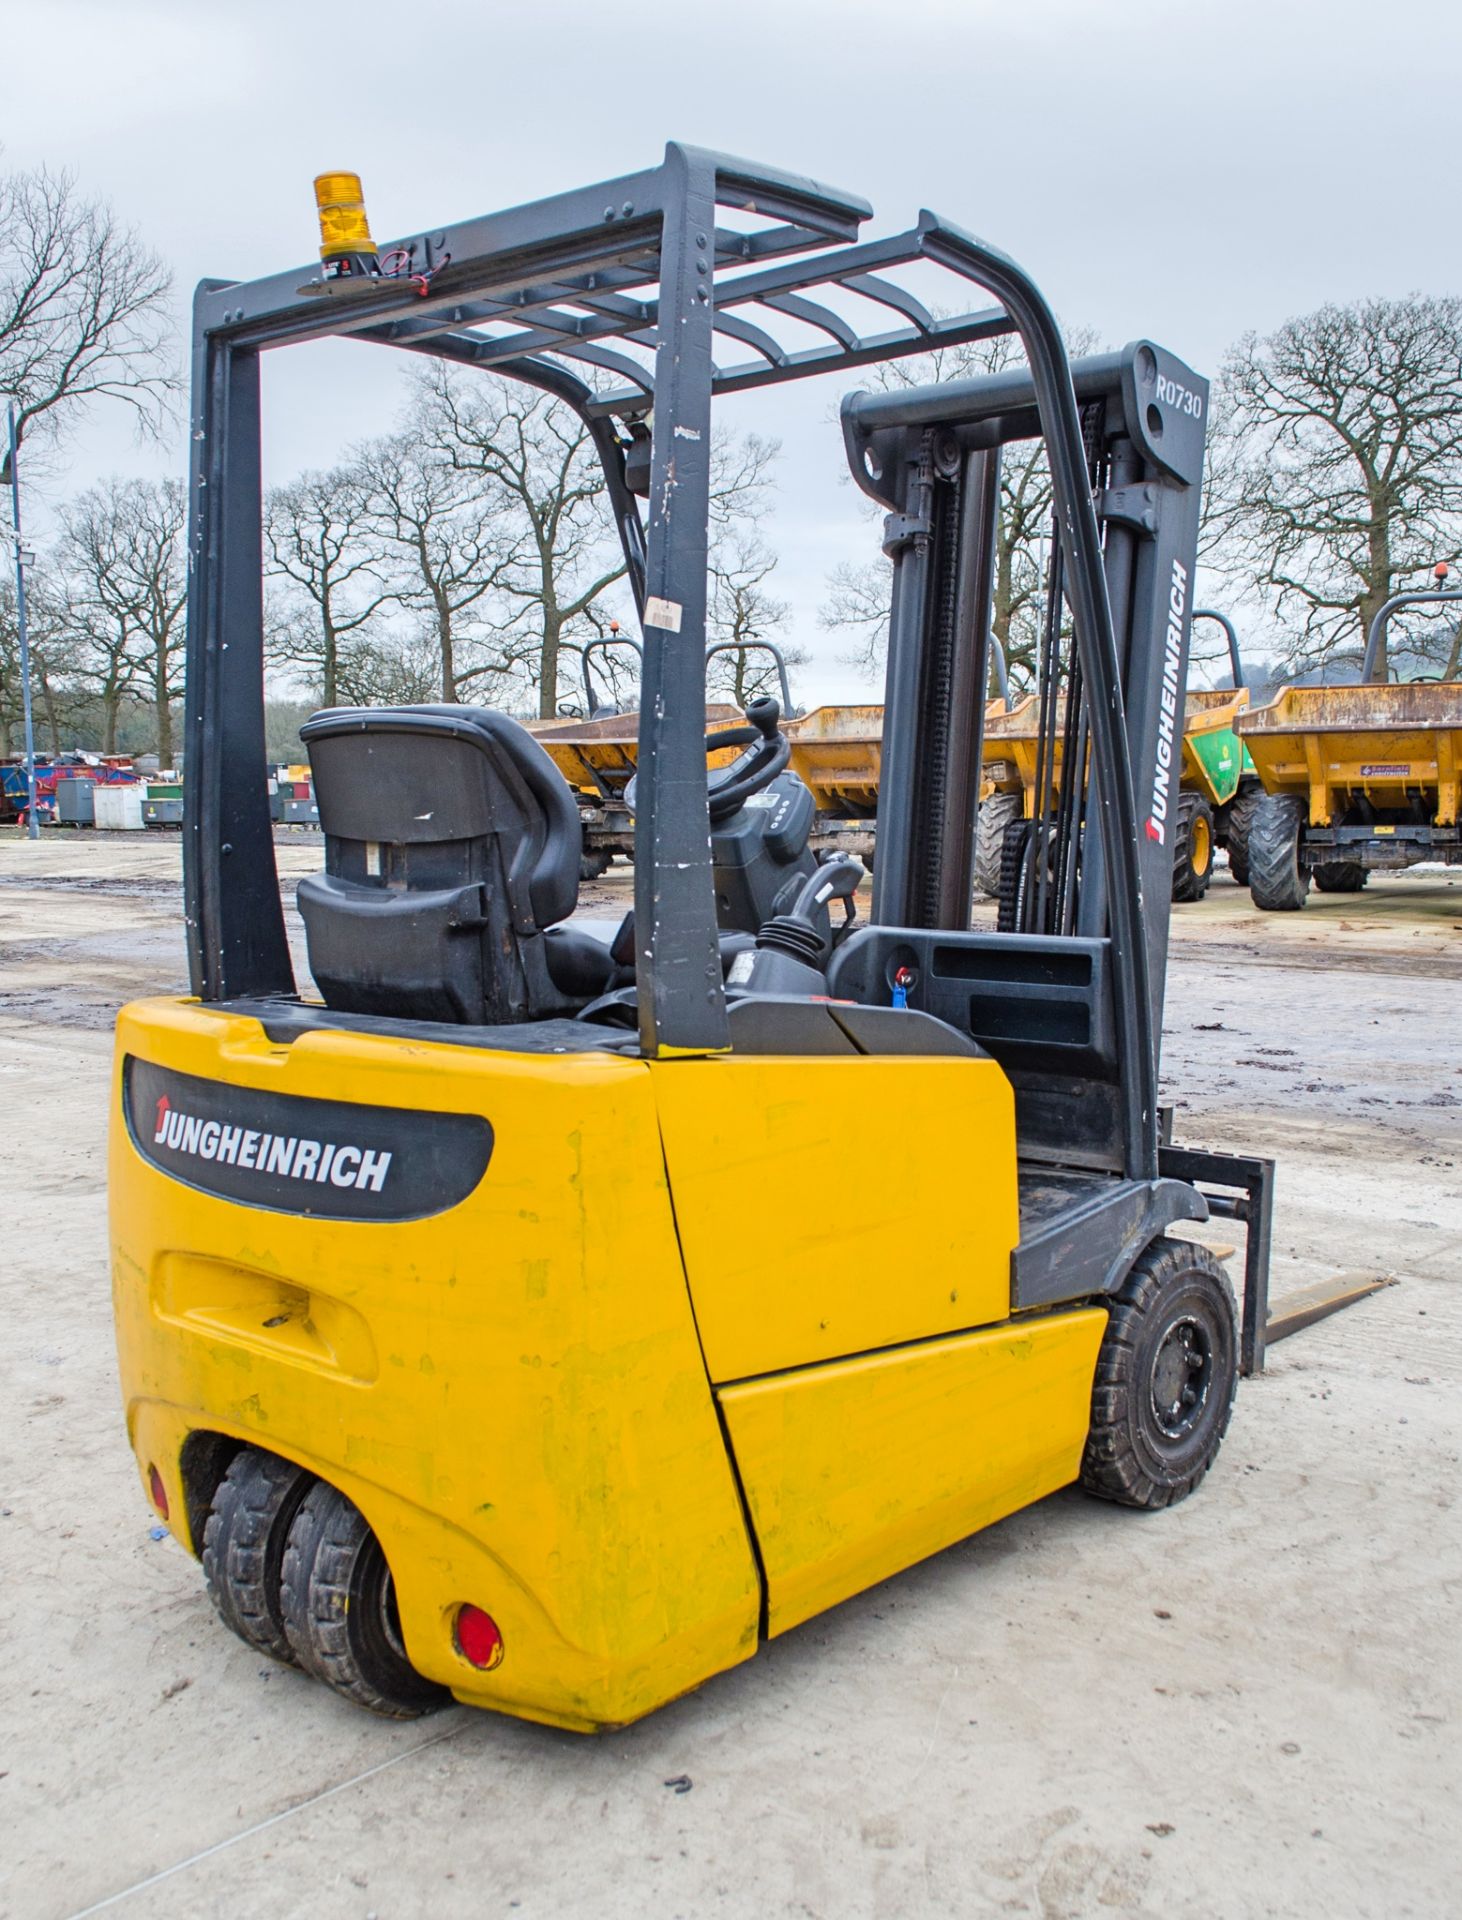 Jungheinrich EFGDF-13-4500DZ battery electric fork lift truck Year: 2001 S/N: 89918168 c/w battery - Image 3 of 14